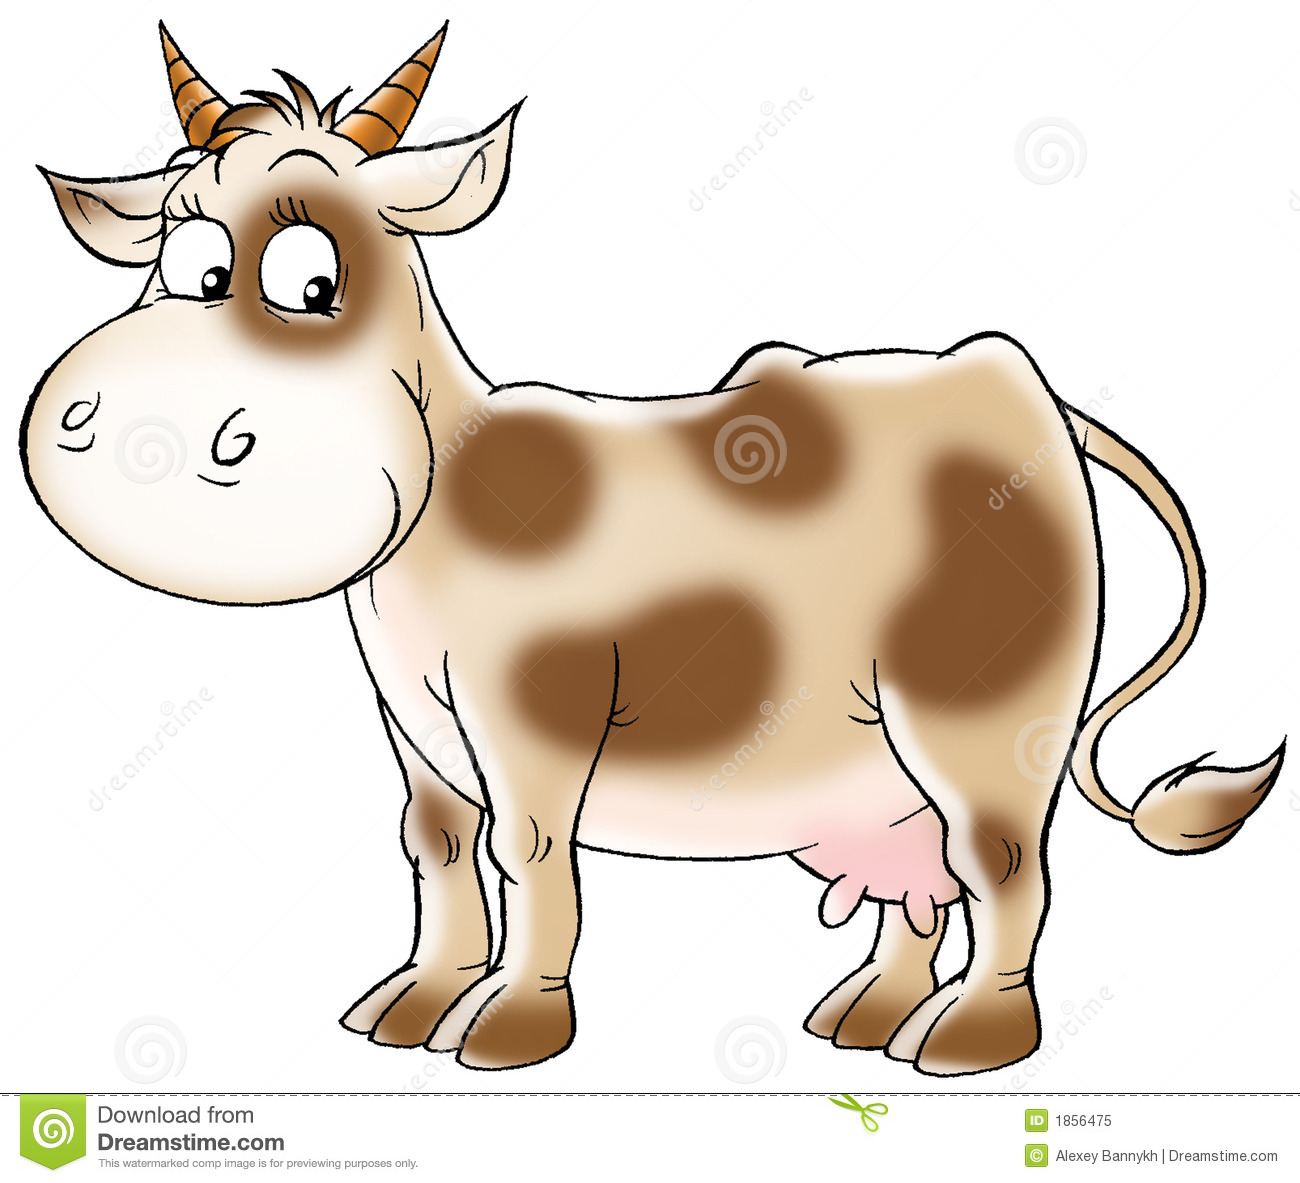 Add New Clip Art Allows You Can Use This Animated Cow Clip Art